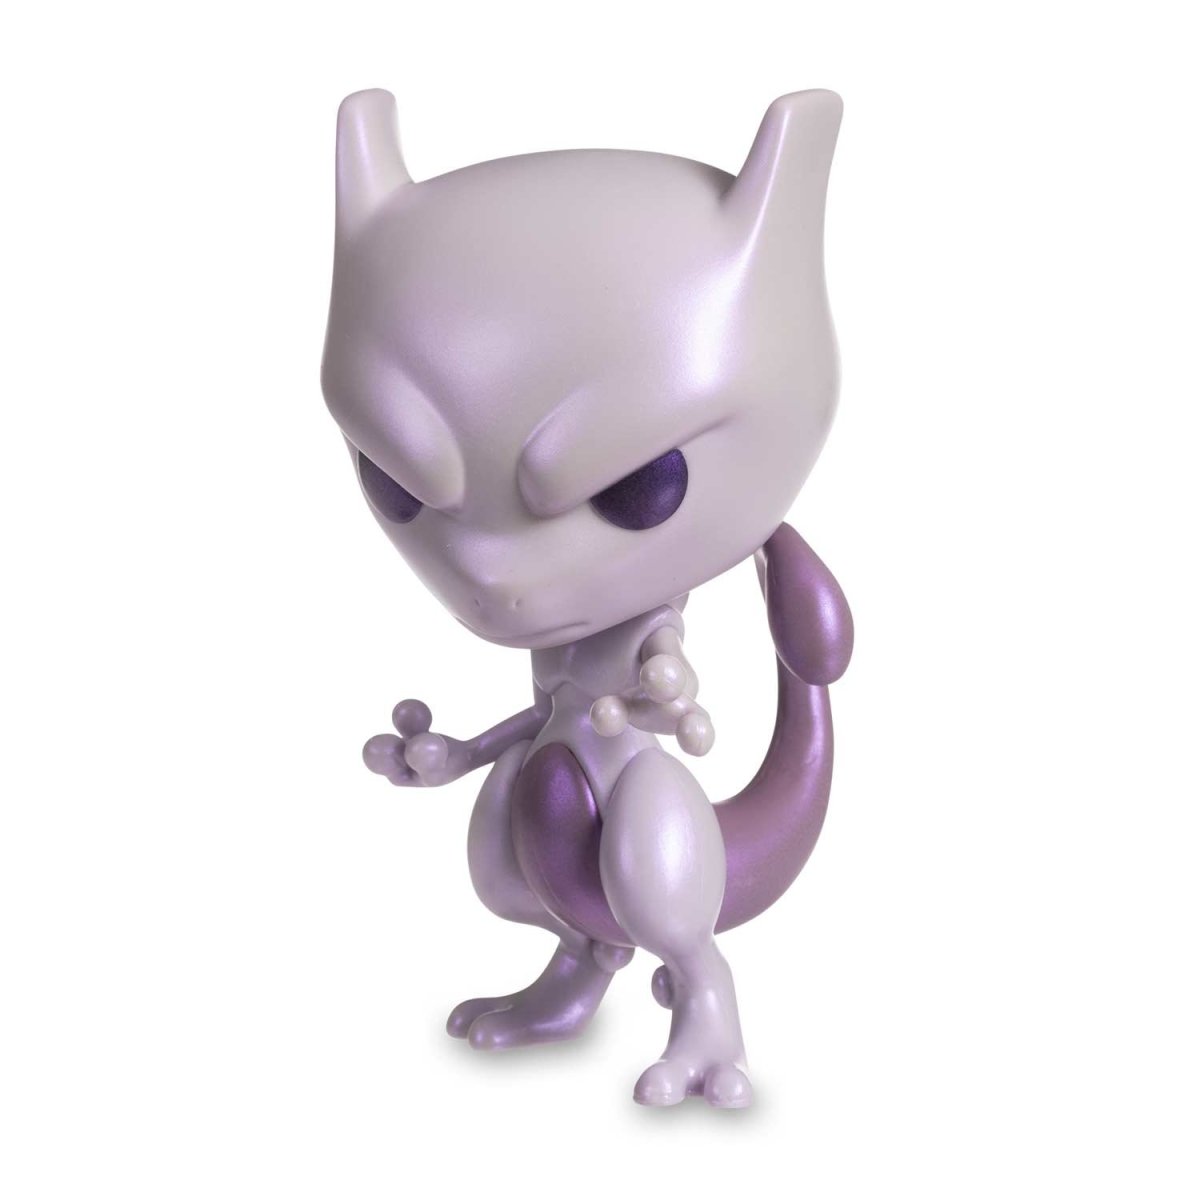 Mewtwo Pearlescent Pop! Vinyl Figure by Funko